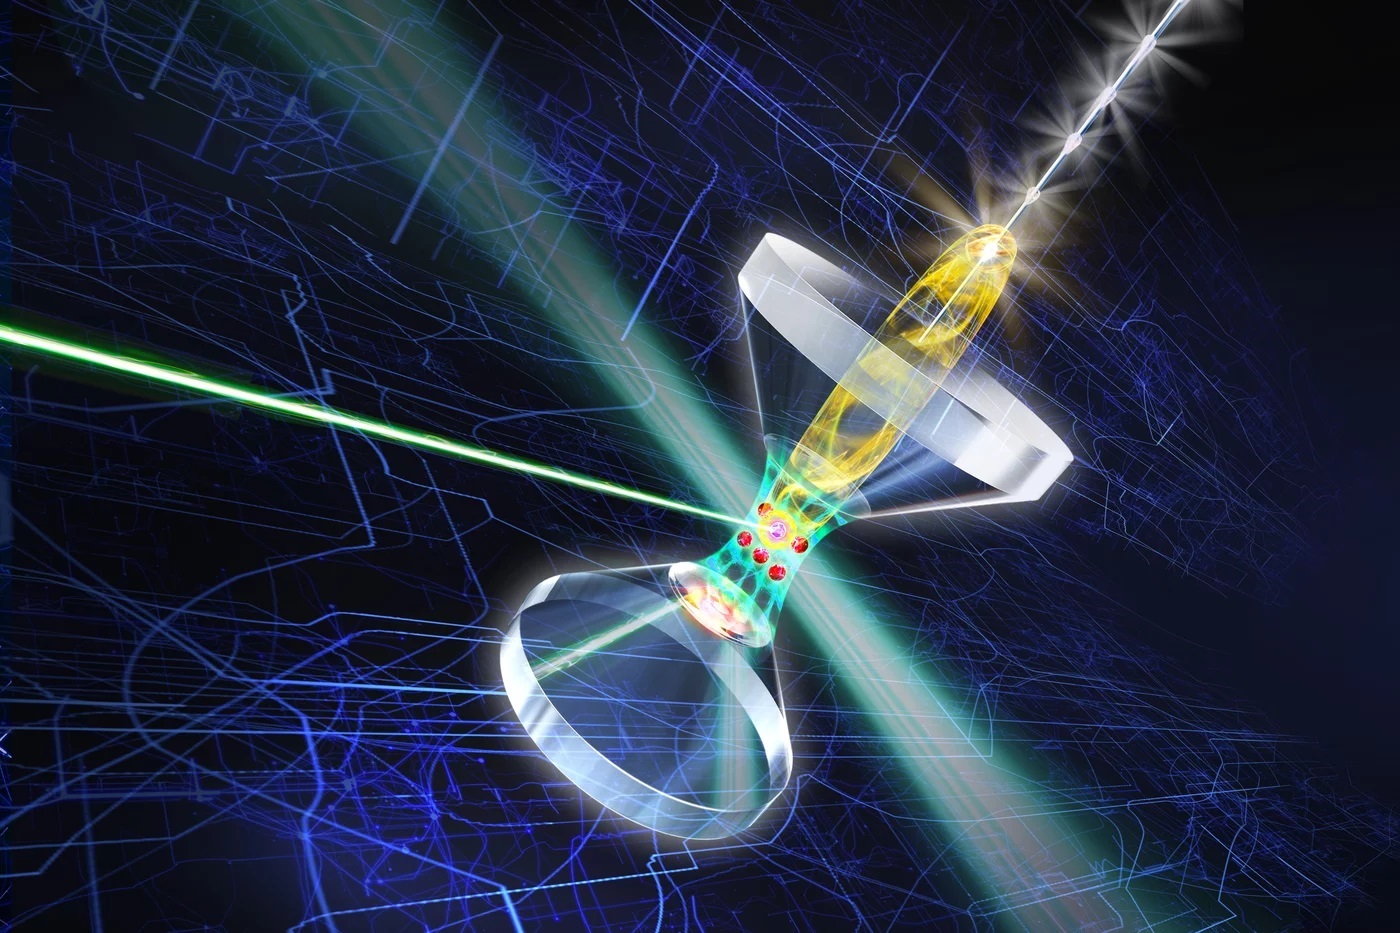 Visualisation of rubidium atoms trapped in the optical resonator and addressed individually using a highly focussed laser beam